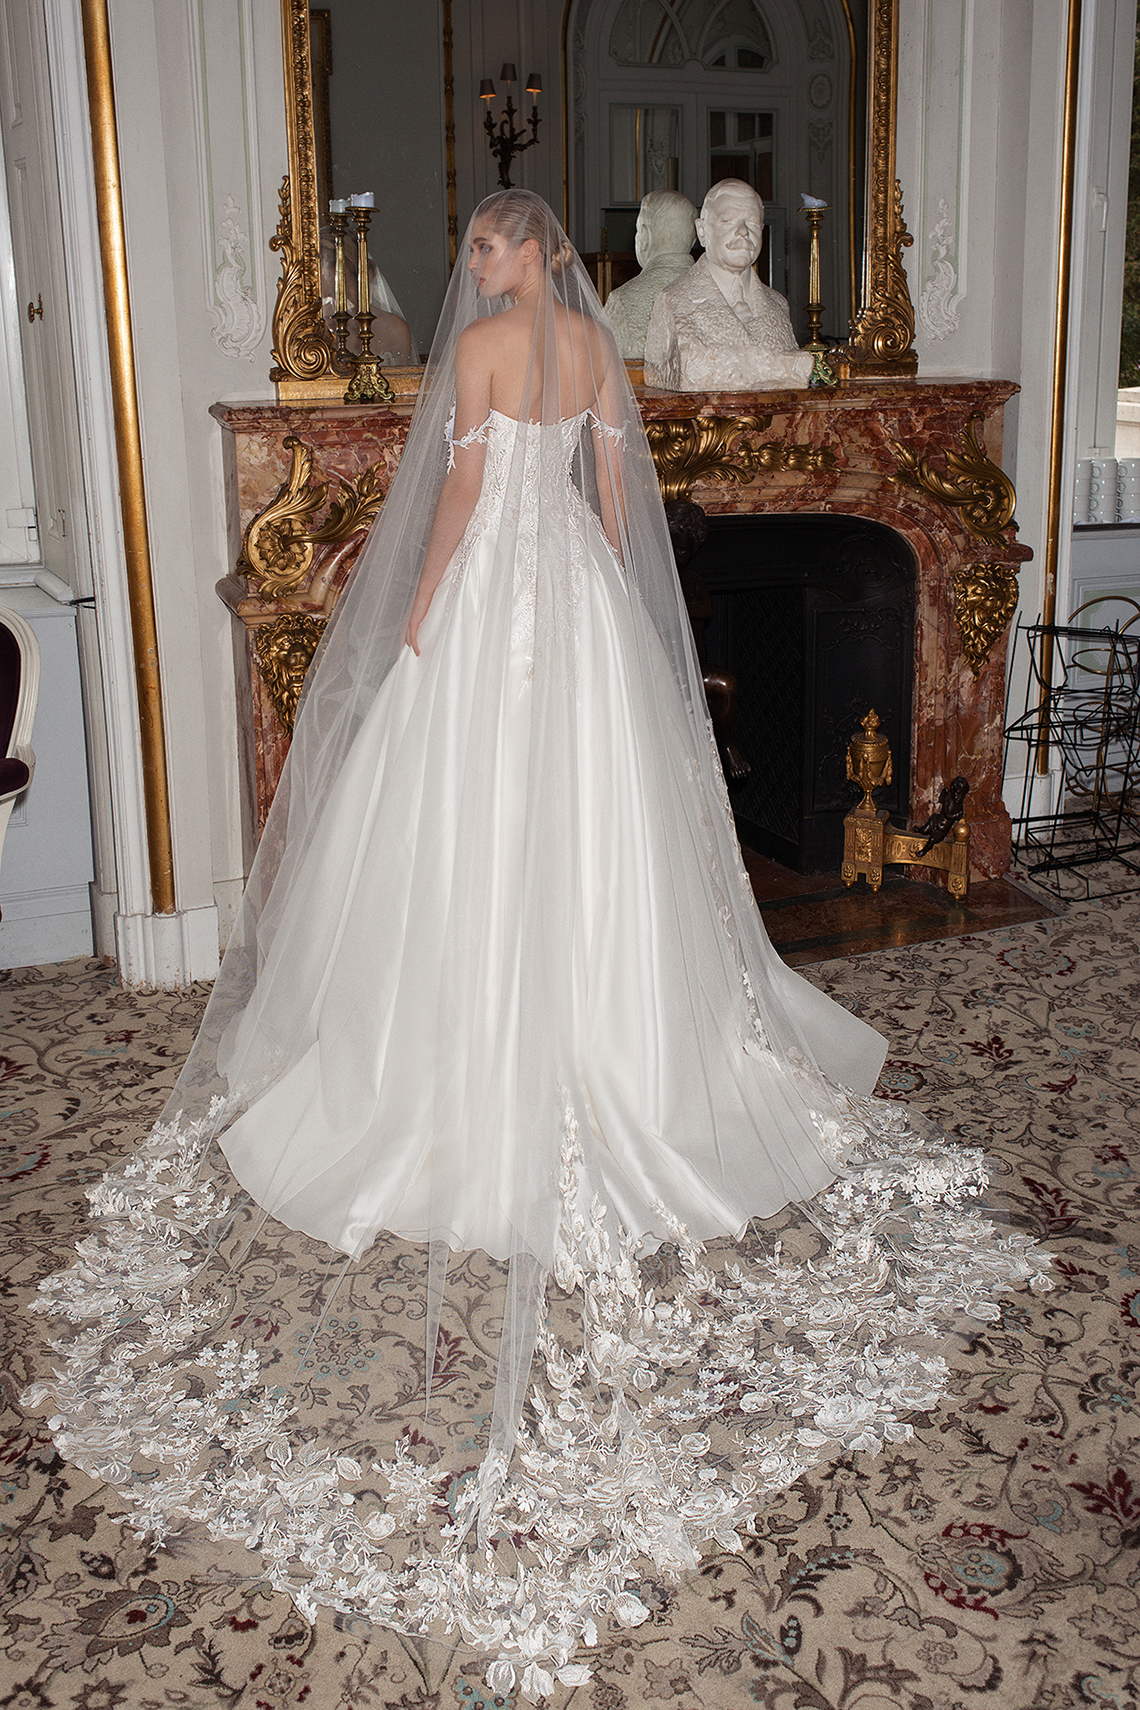 How To Look Like Royalty On Your Wedding Day – Galia Lahav Couture Dress Collection – AIDA + CHIQUITA VEIL